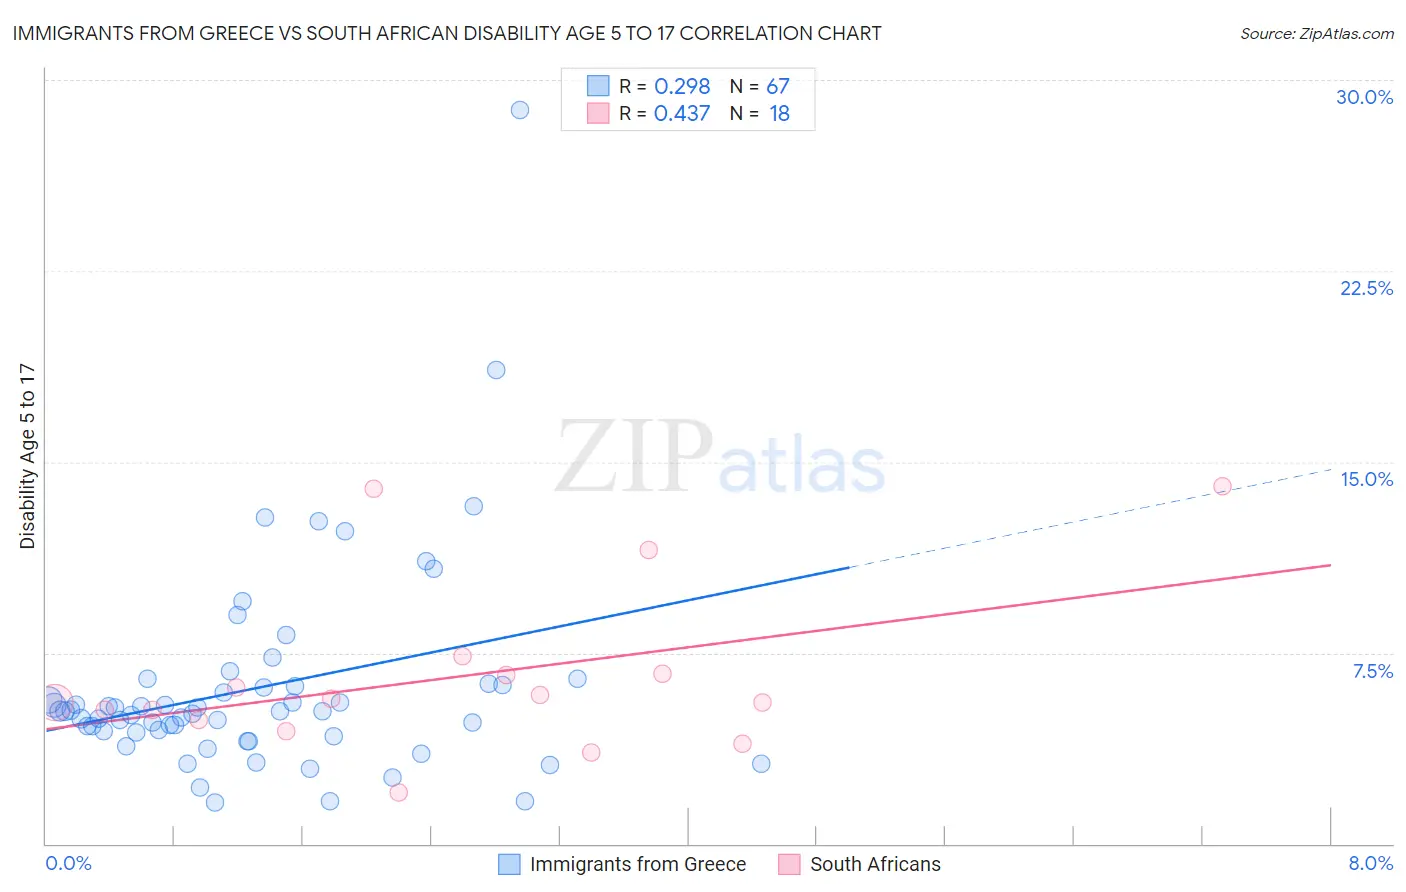 Immigrants from Greece vs South African Disability Age 5 to 17